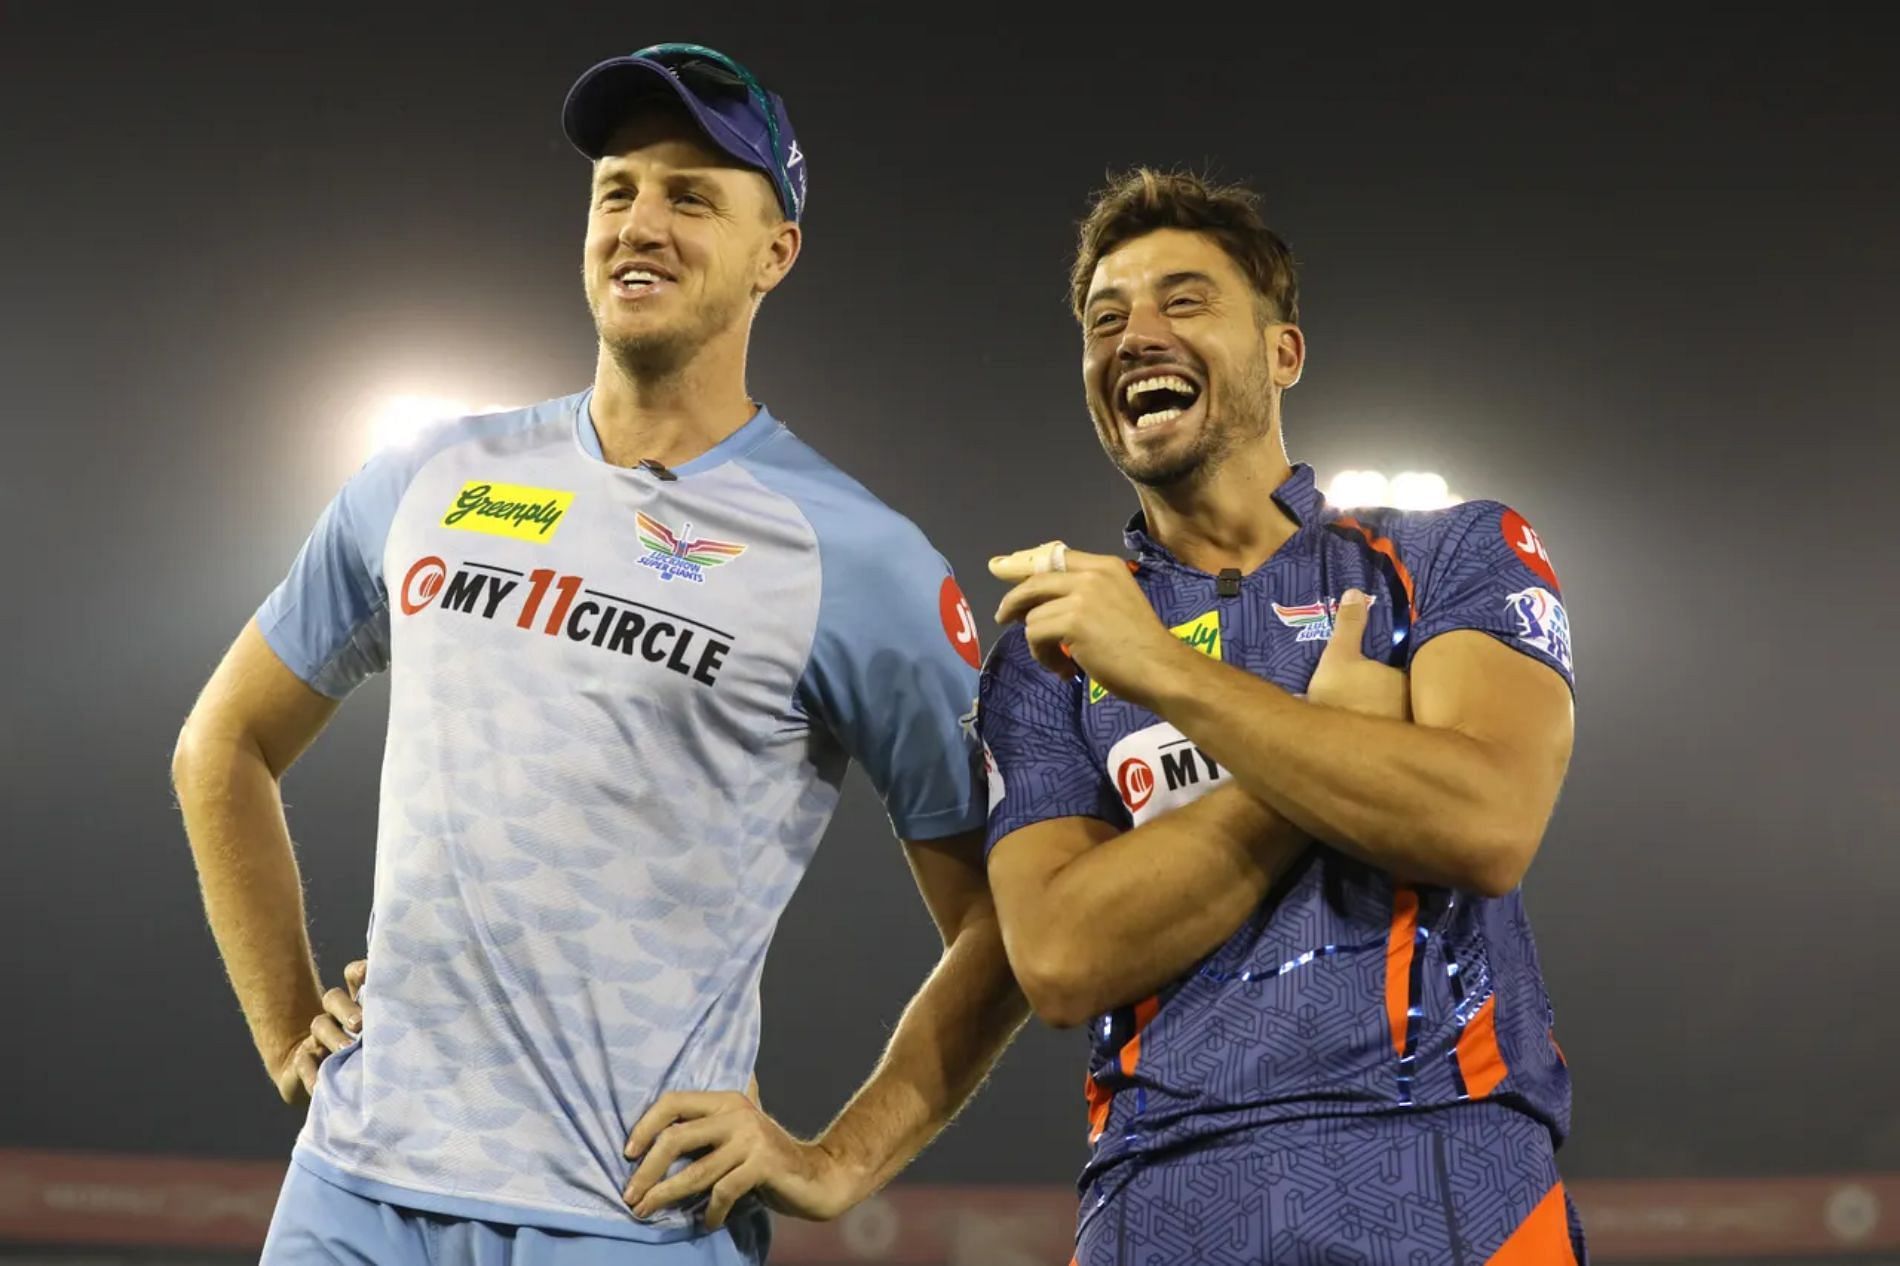 Morne Morkel, Marcus Stoinis